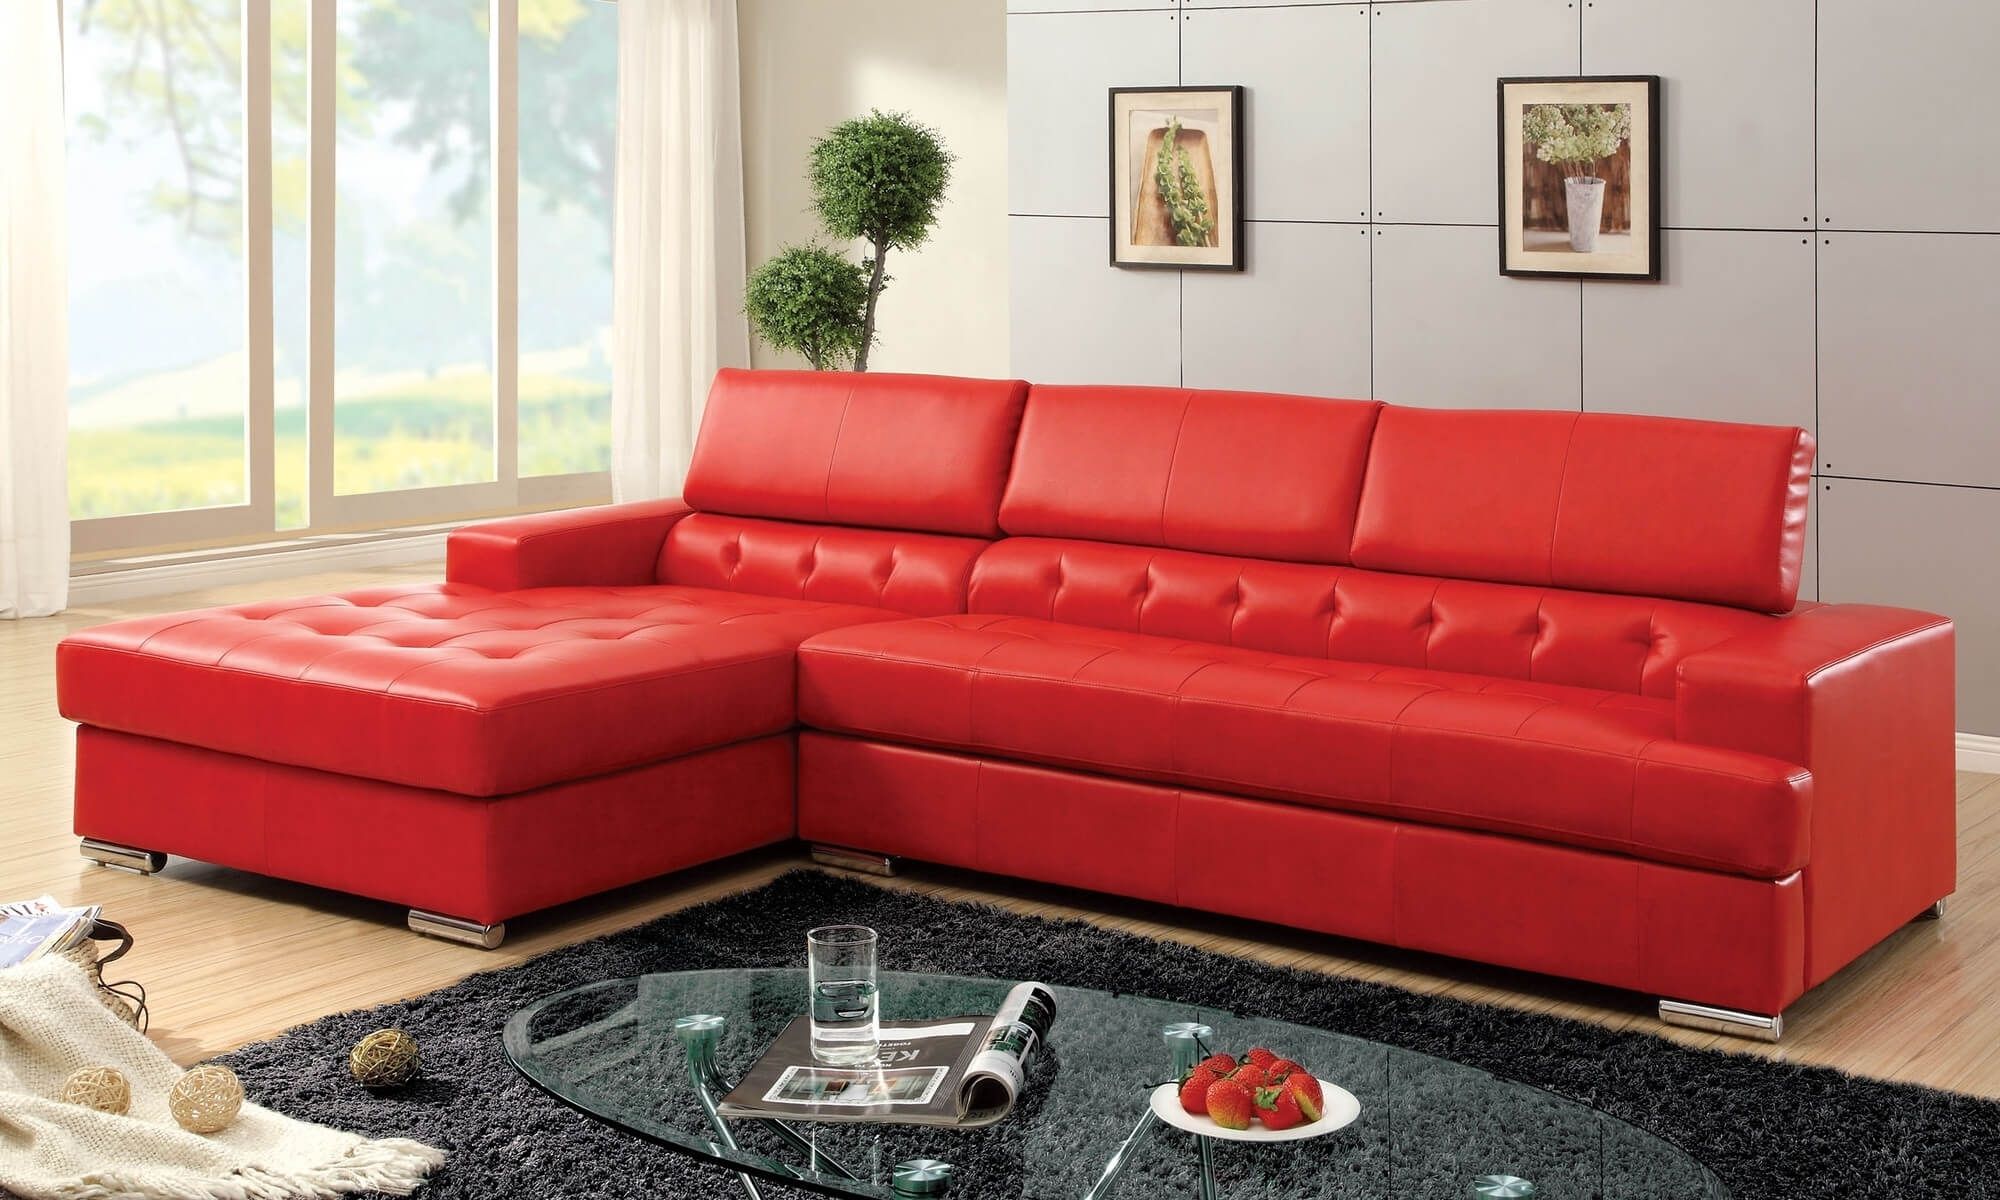 New Red Leather Sectional Sofa With Chaise – Best Sectional Sofa Ideas Inside Red Leather Sectionals With Chaise (View 2 of 15)